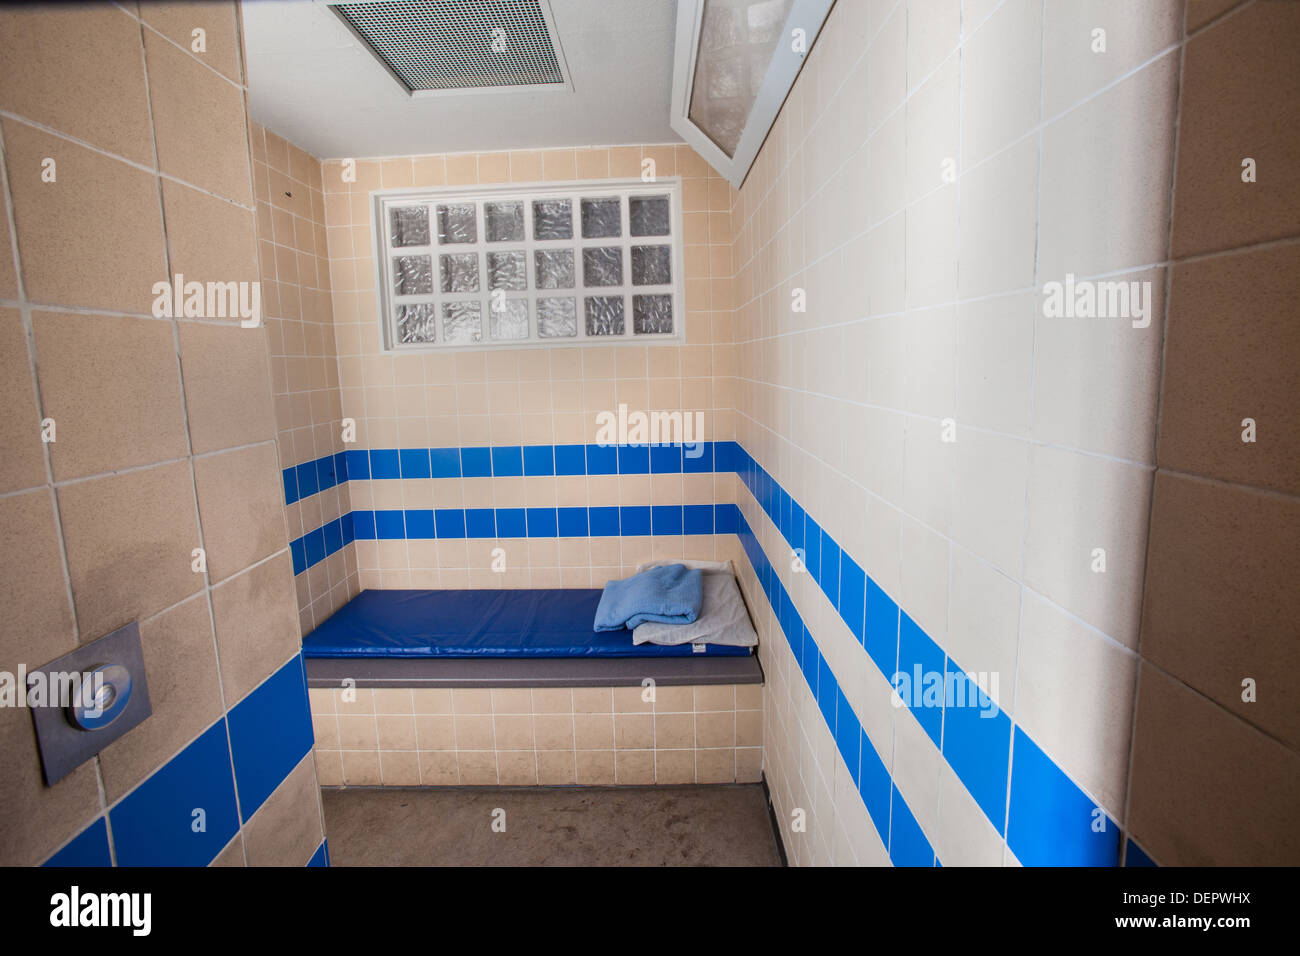 Police station custody suite and cell Stock Photo